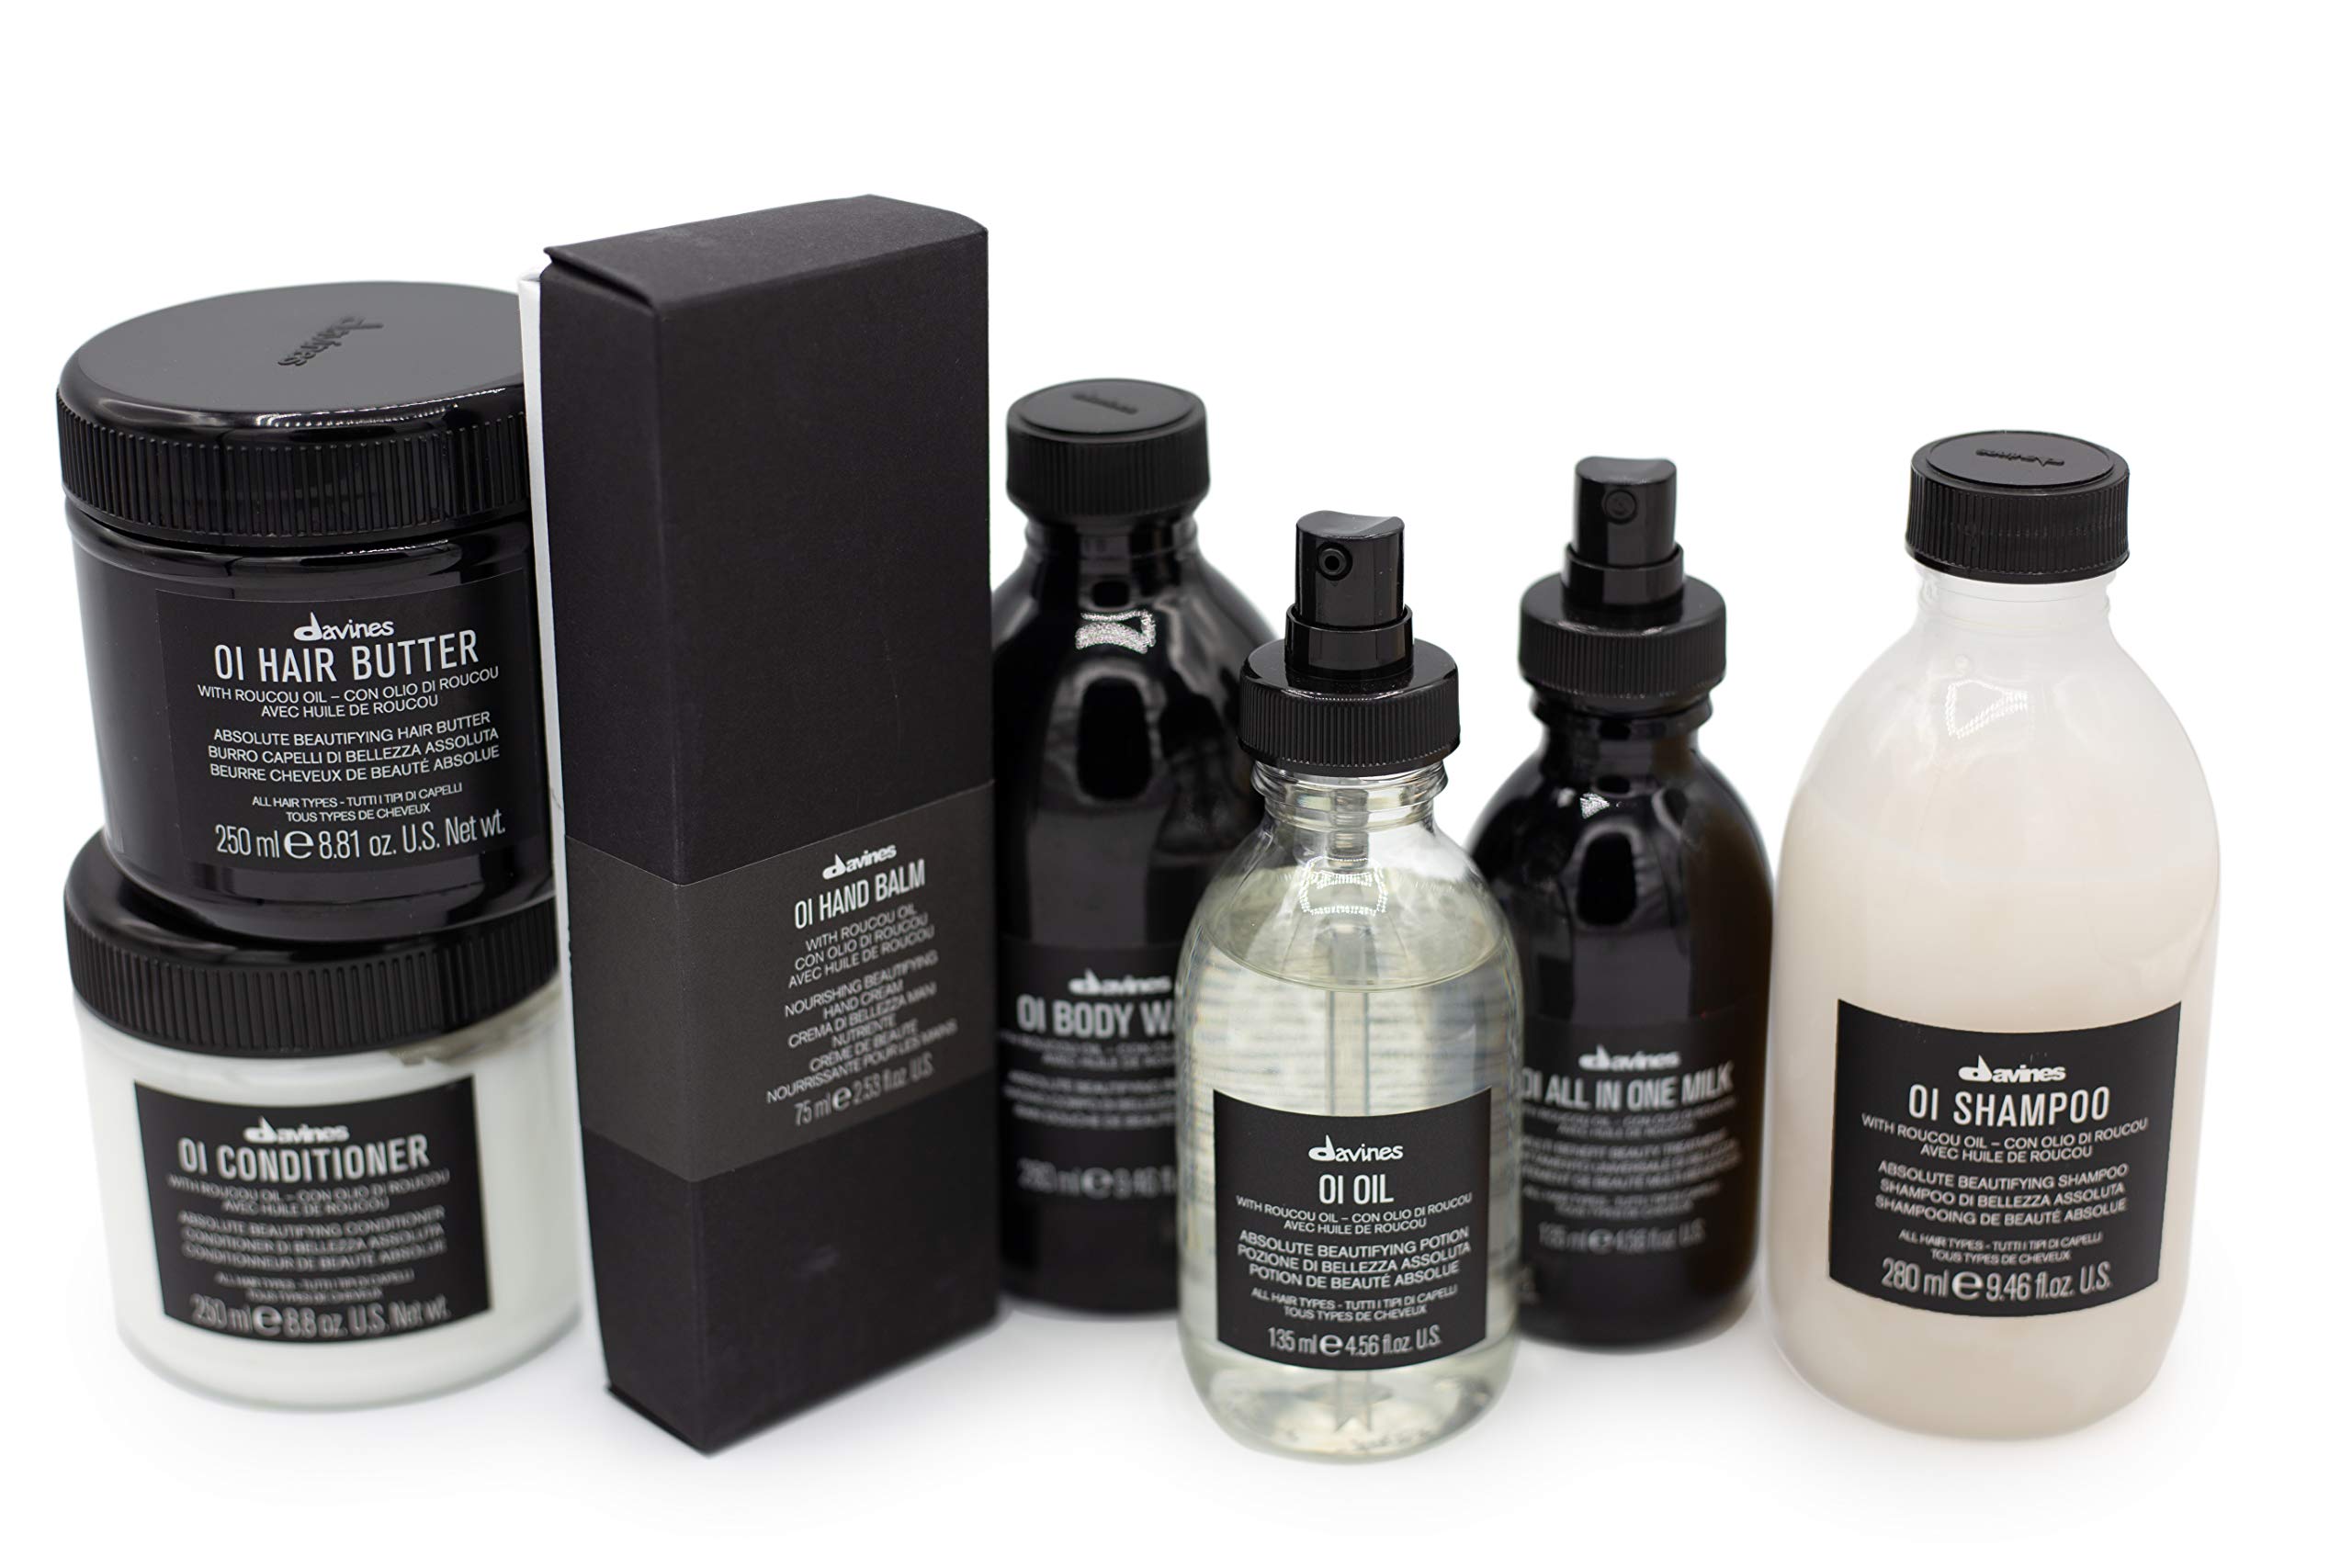 Davines OI Oil | Weightless Hair Oil Perfect for Dry Hair, Coarse & Curly Hair Types | Conrol Frizz | Soft, Shiny Hair